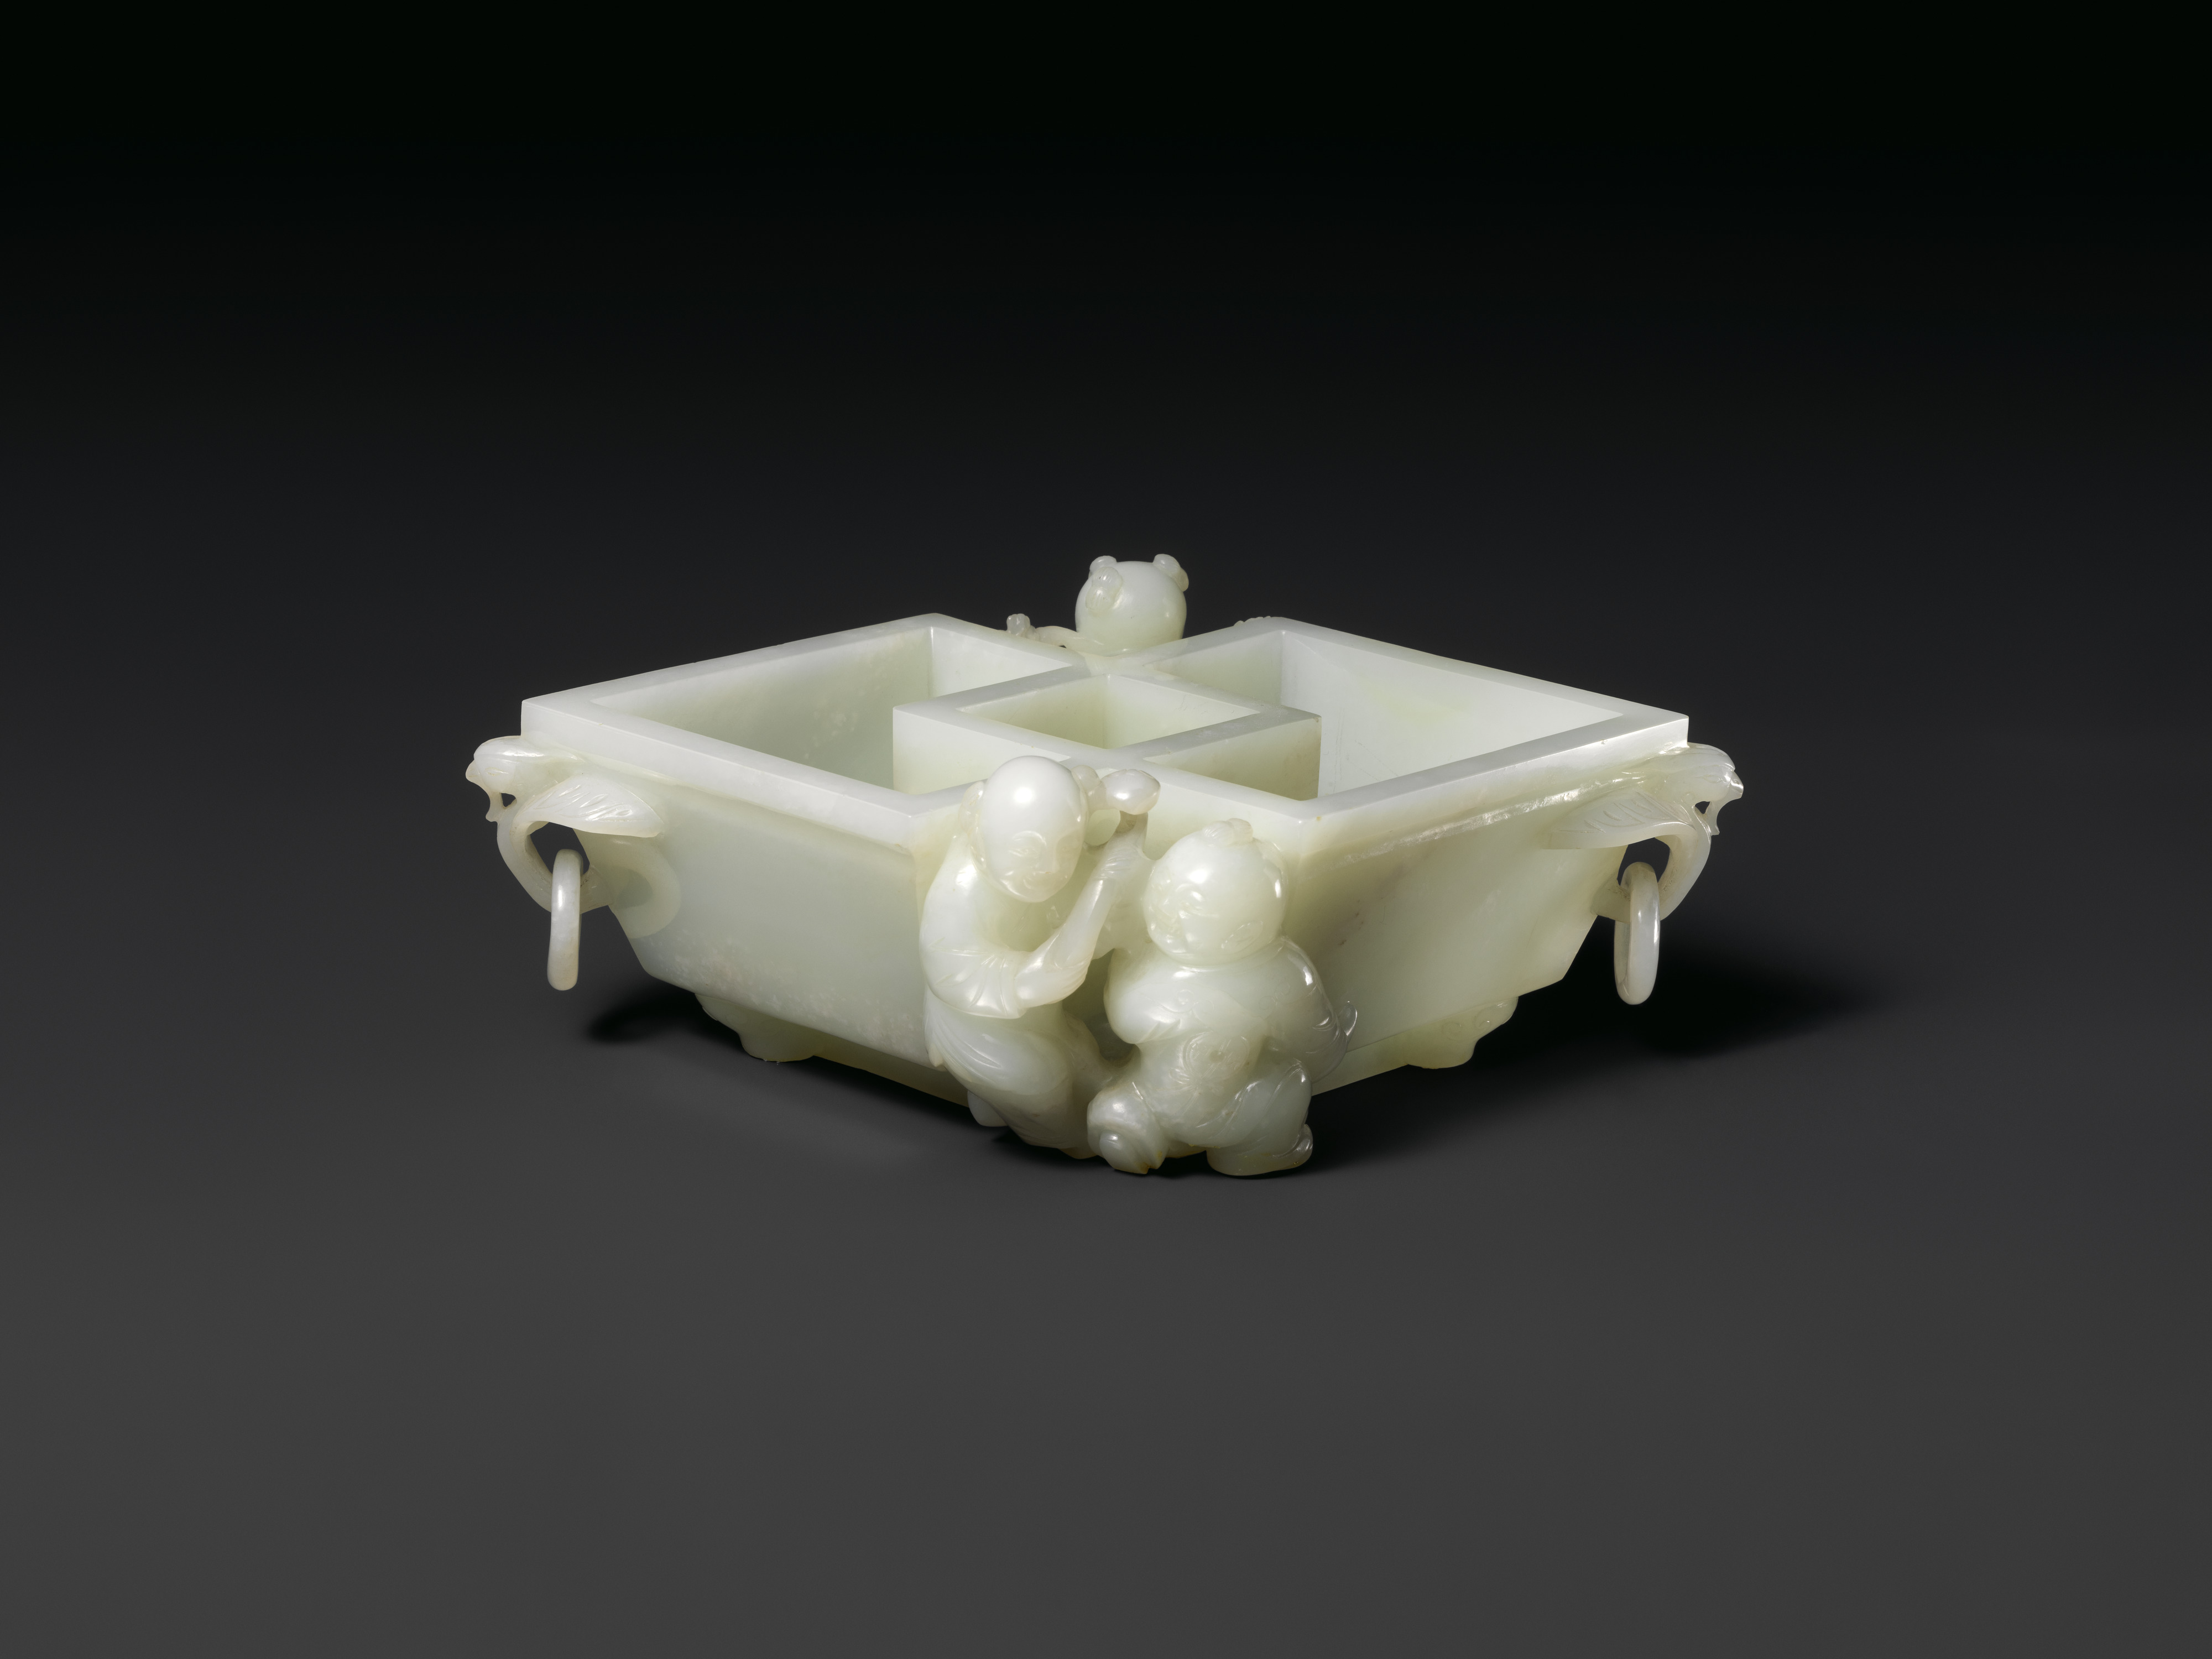 Water vessel in the shape of a marriage cup, Jade (nephrite), China